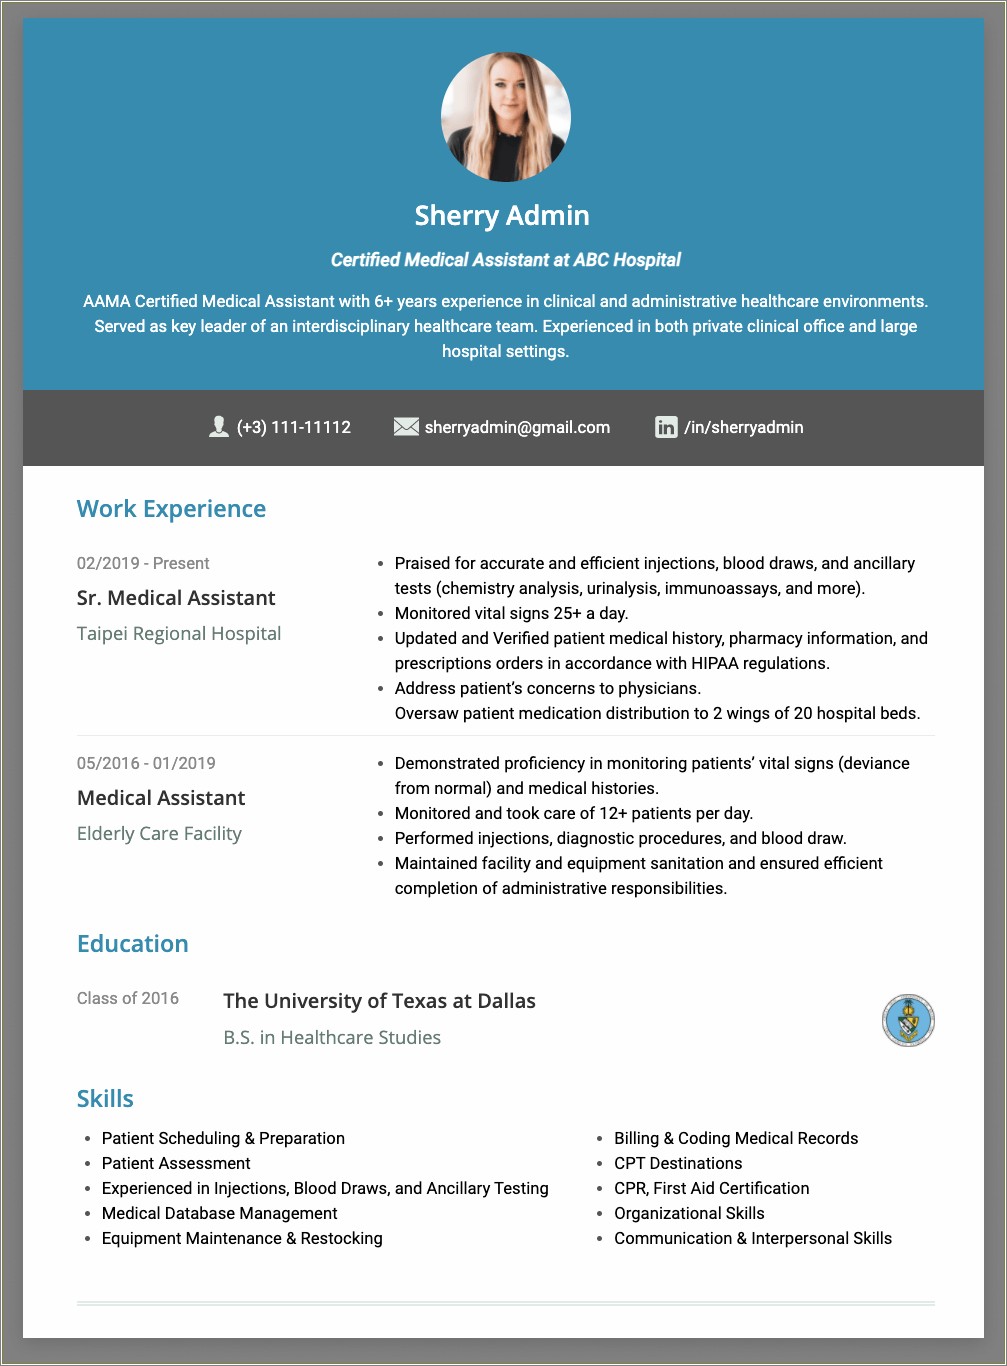 Resume Summary Examples For Care Worker